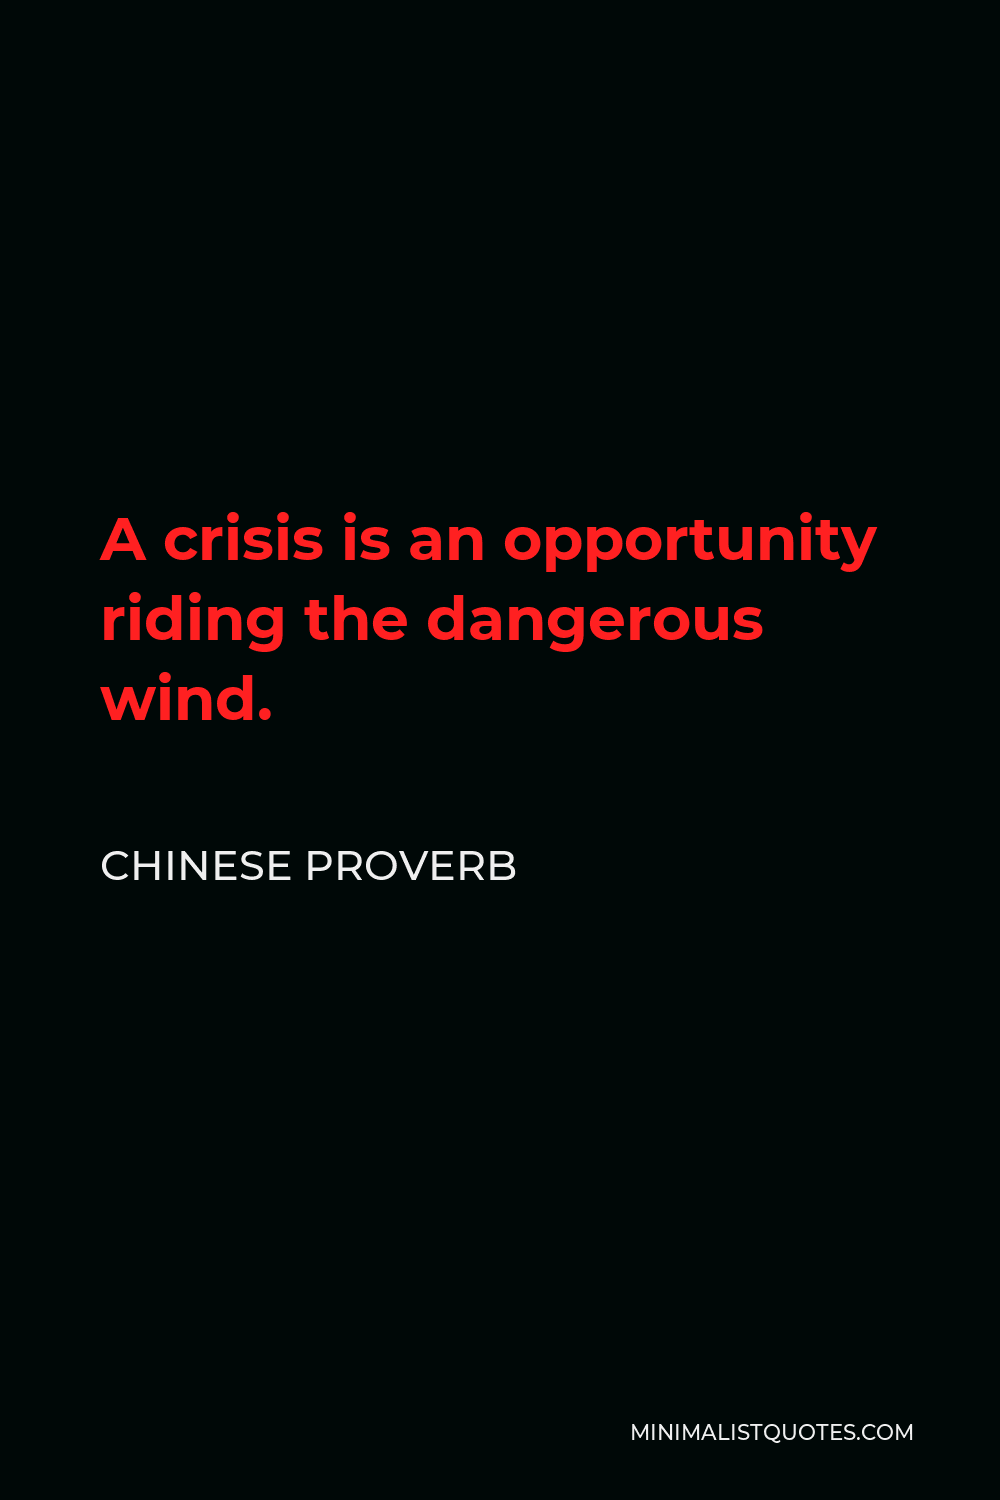 Chinese Proverb Quote - A crisis is an opportunity riding the dangerous wind.